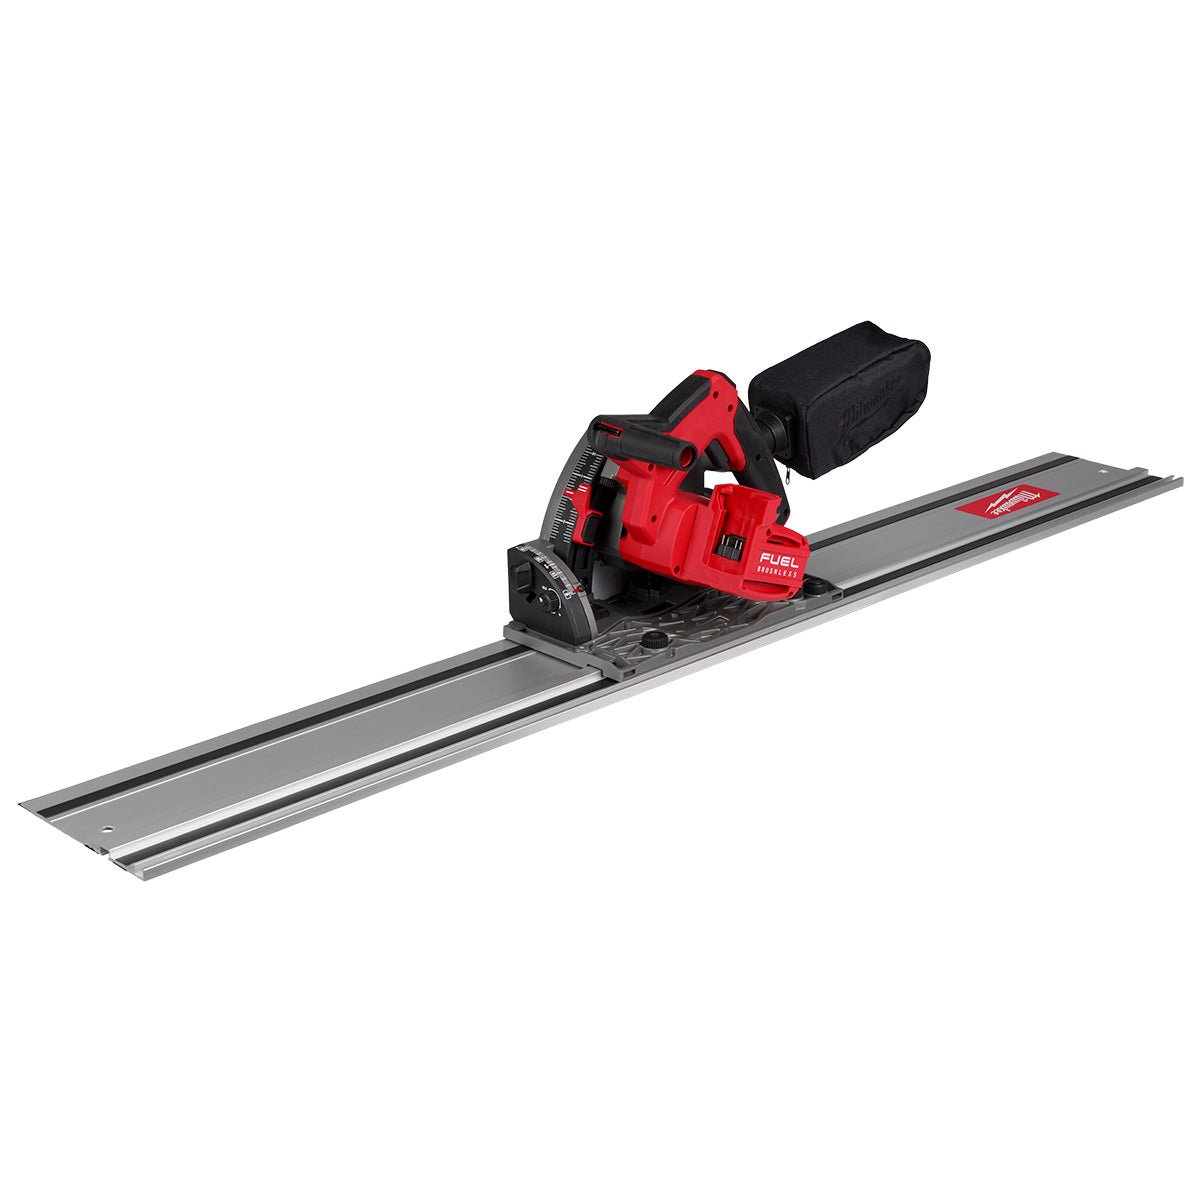 Milwaukee 2831-20 - M18 FUEL 18 Volt Lithium-Ion Brushless Cordless 6-1/2 in. Plunge Track Saw - Tool Only